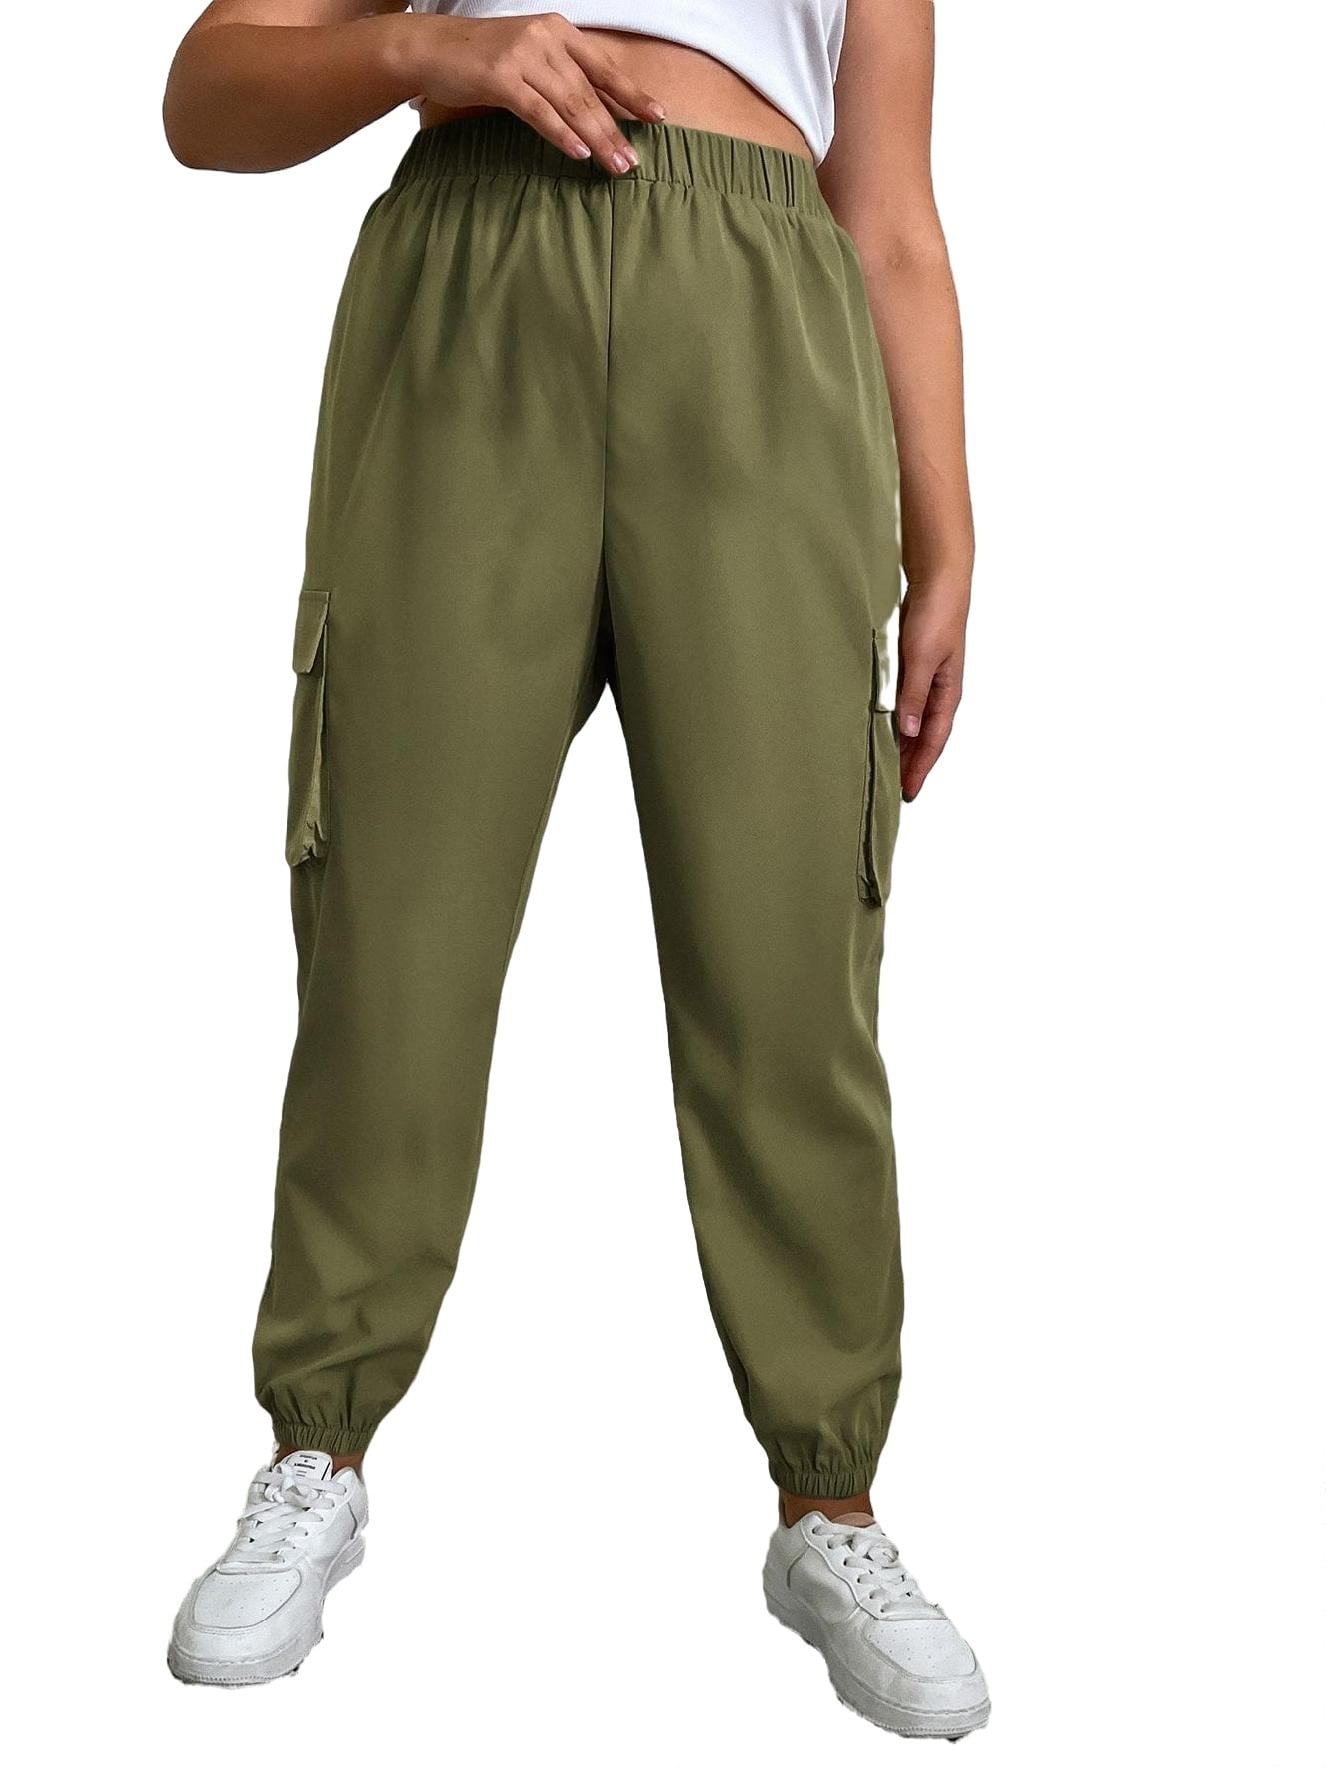 Casual Solid Cargo Pants Army Green Plus Size Pants (Women's) - Walmart.com